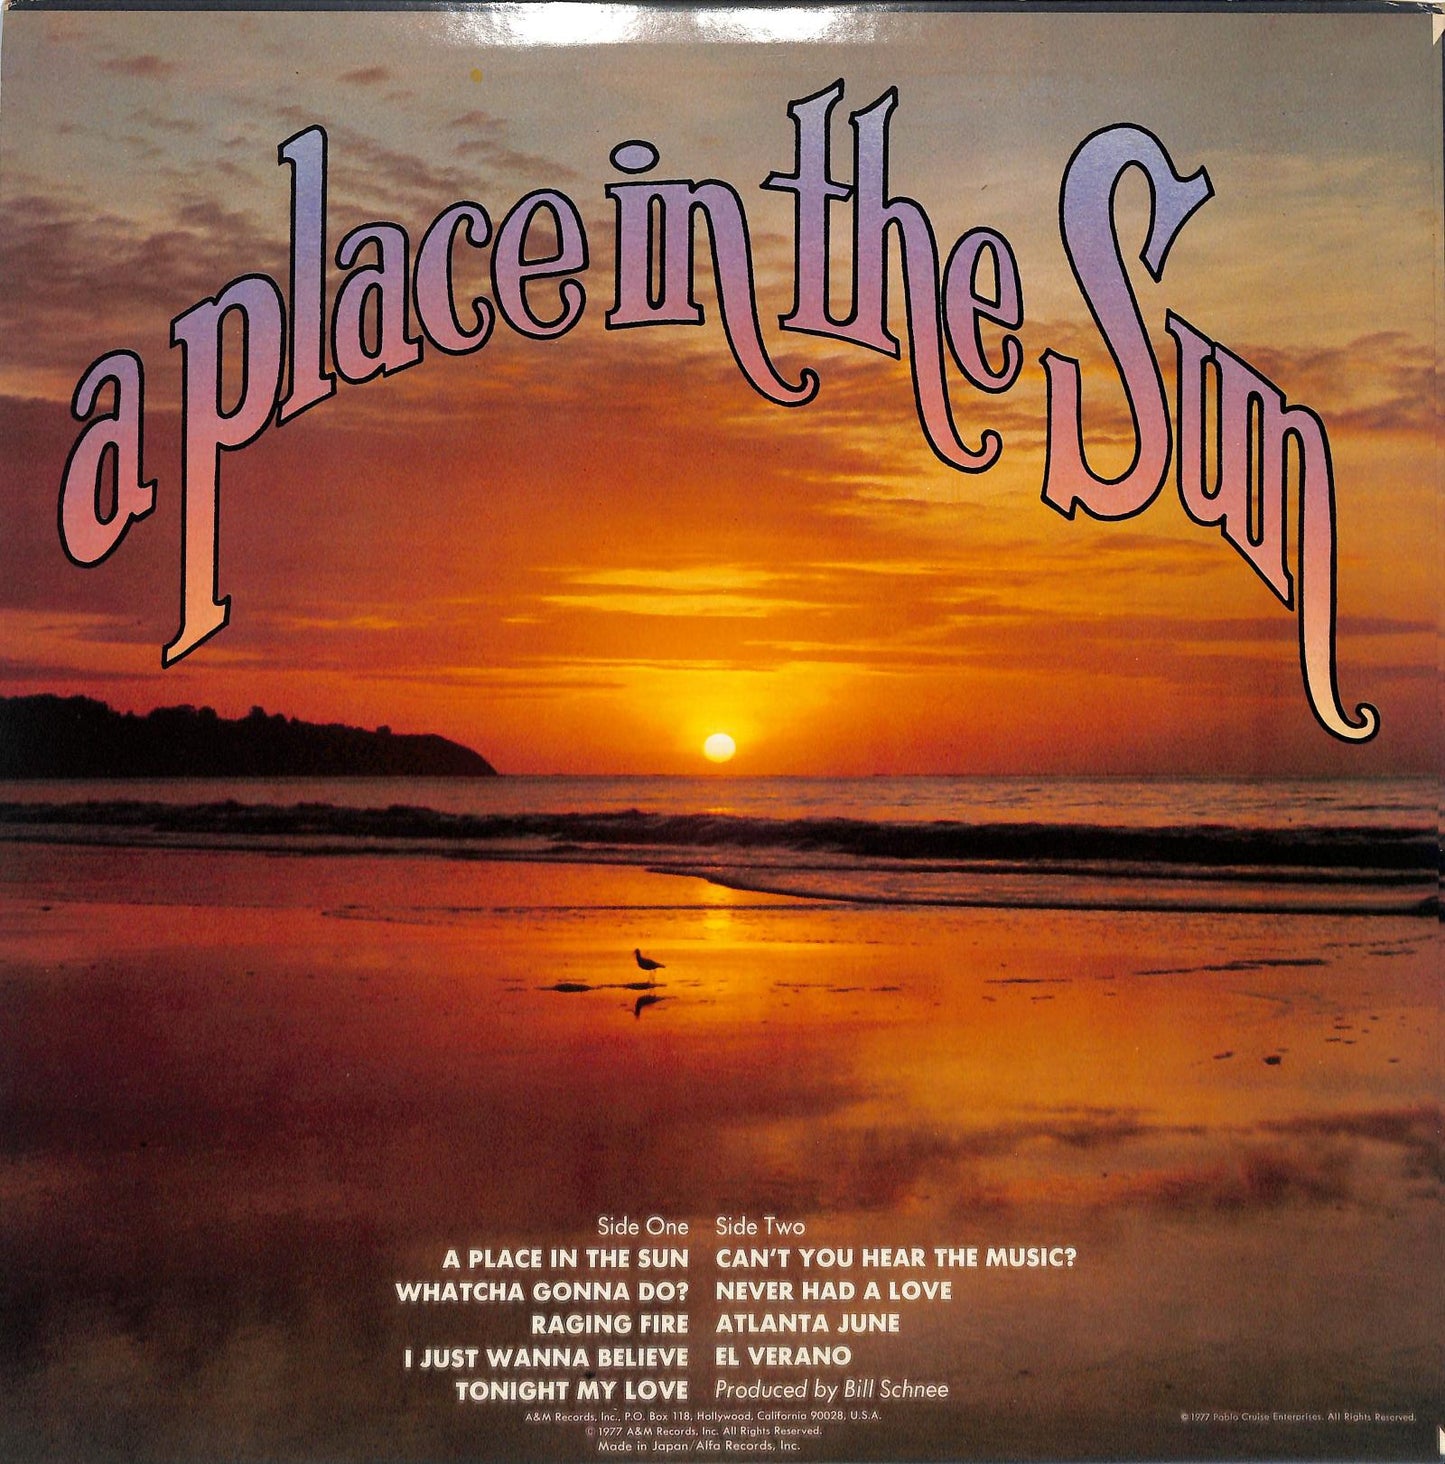 PABLO CRUISE - A Place In The Sun